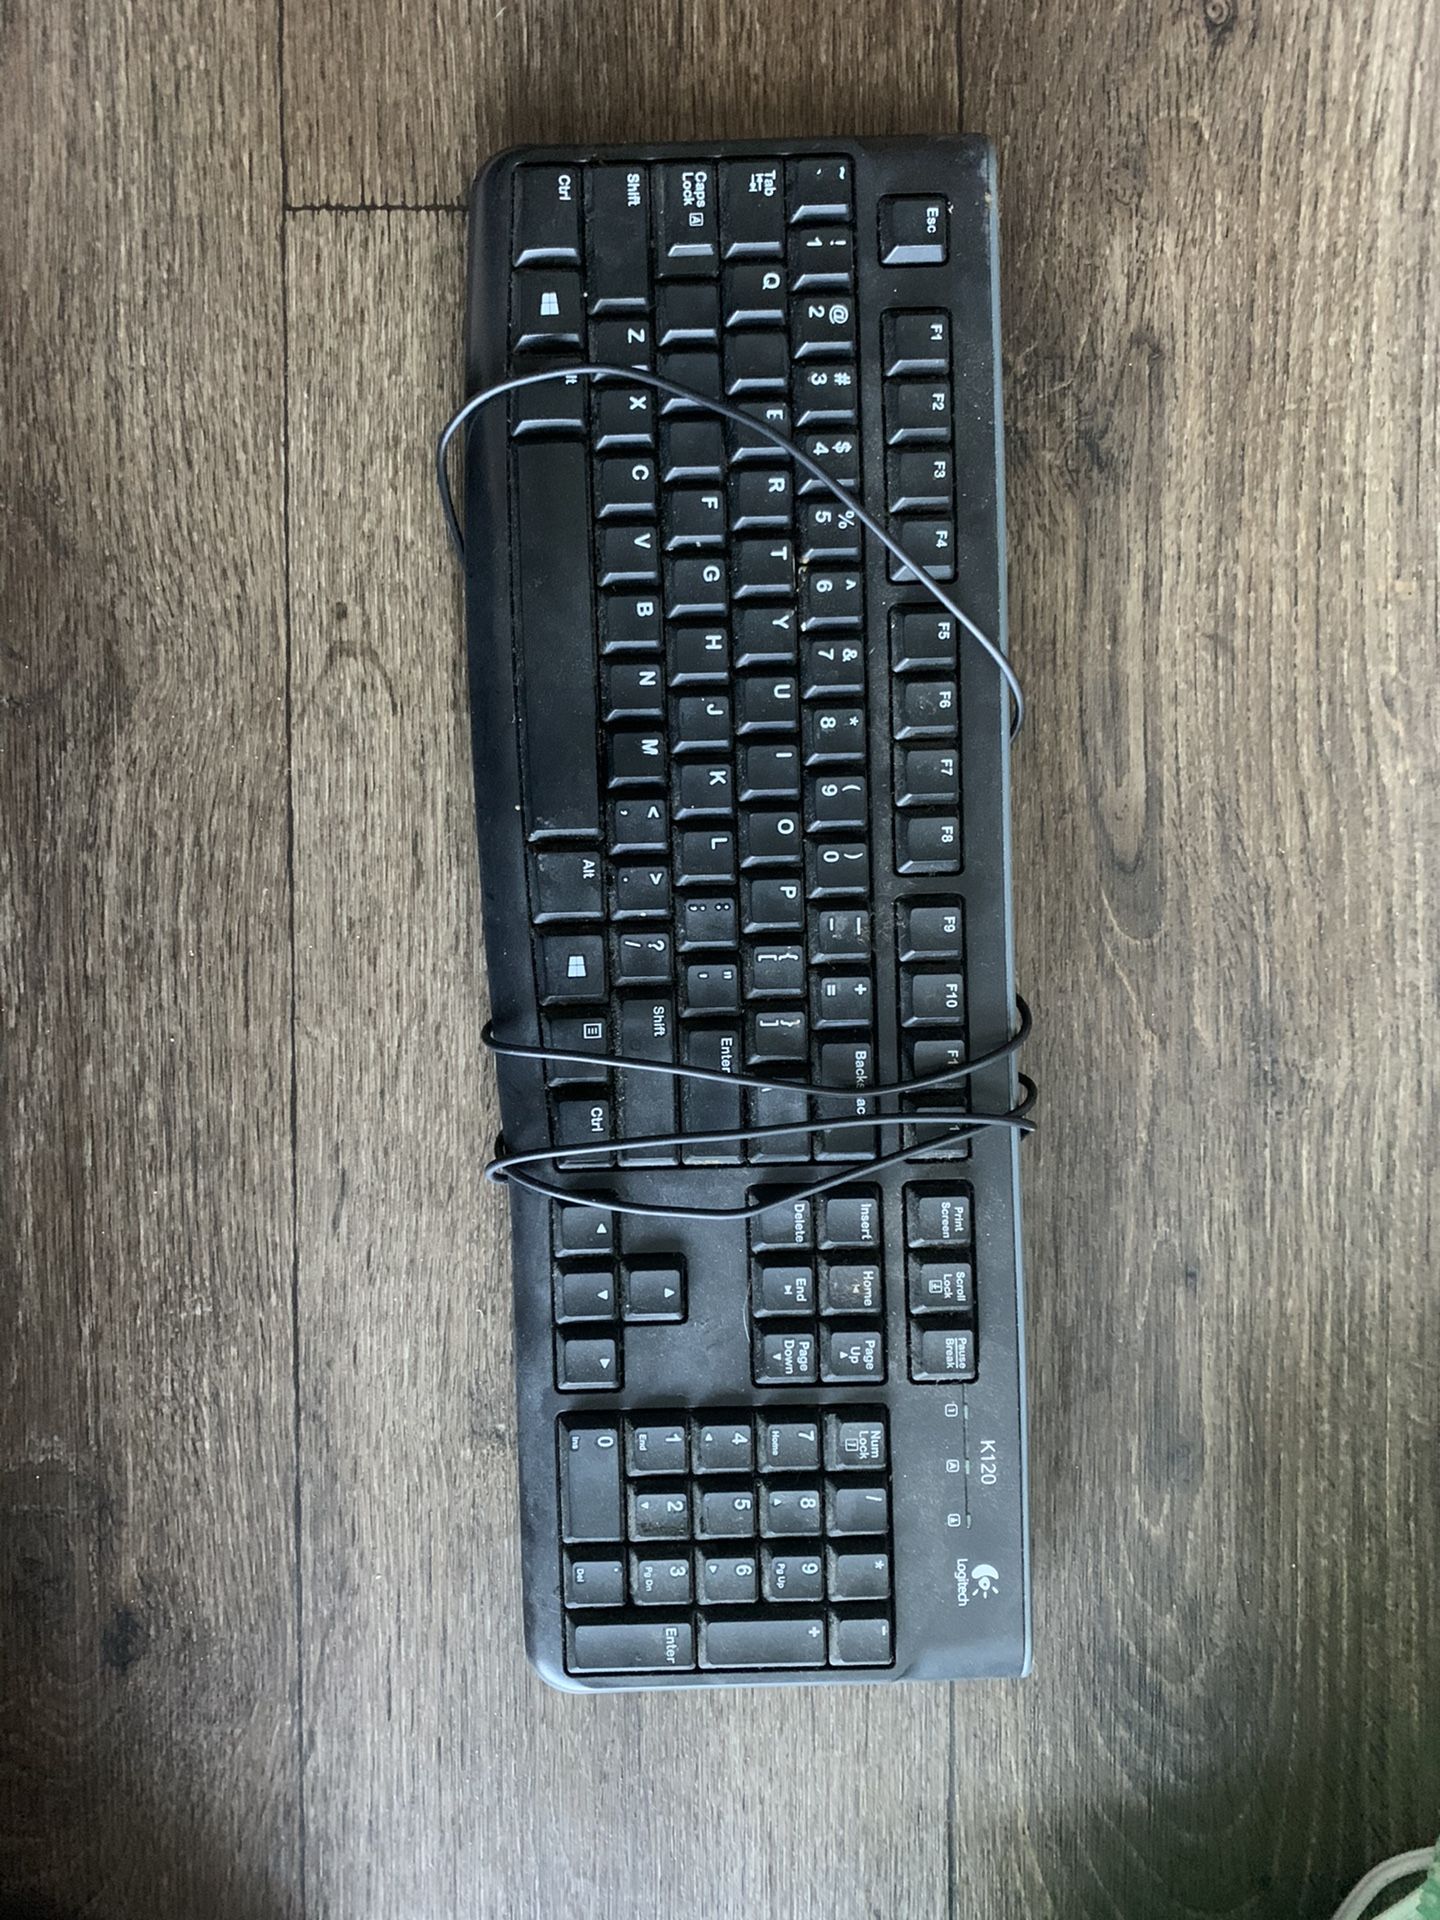 Logitech keyboard for computers or tablet